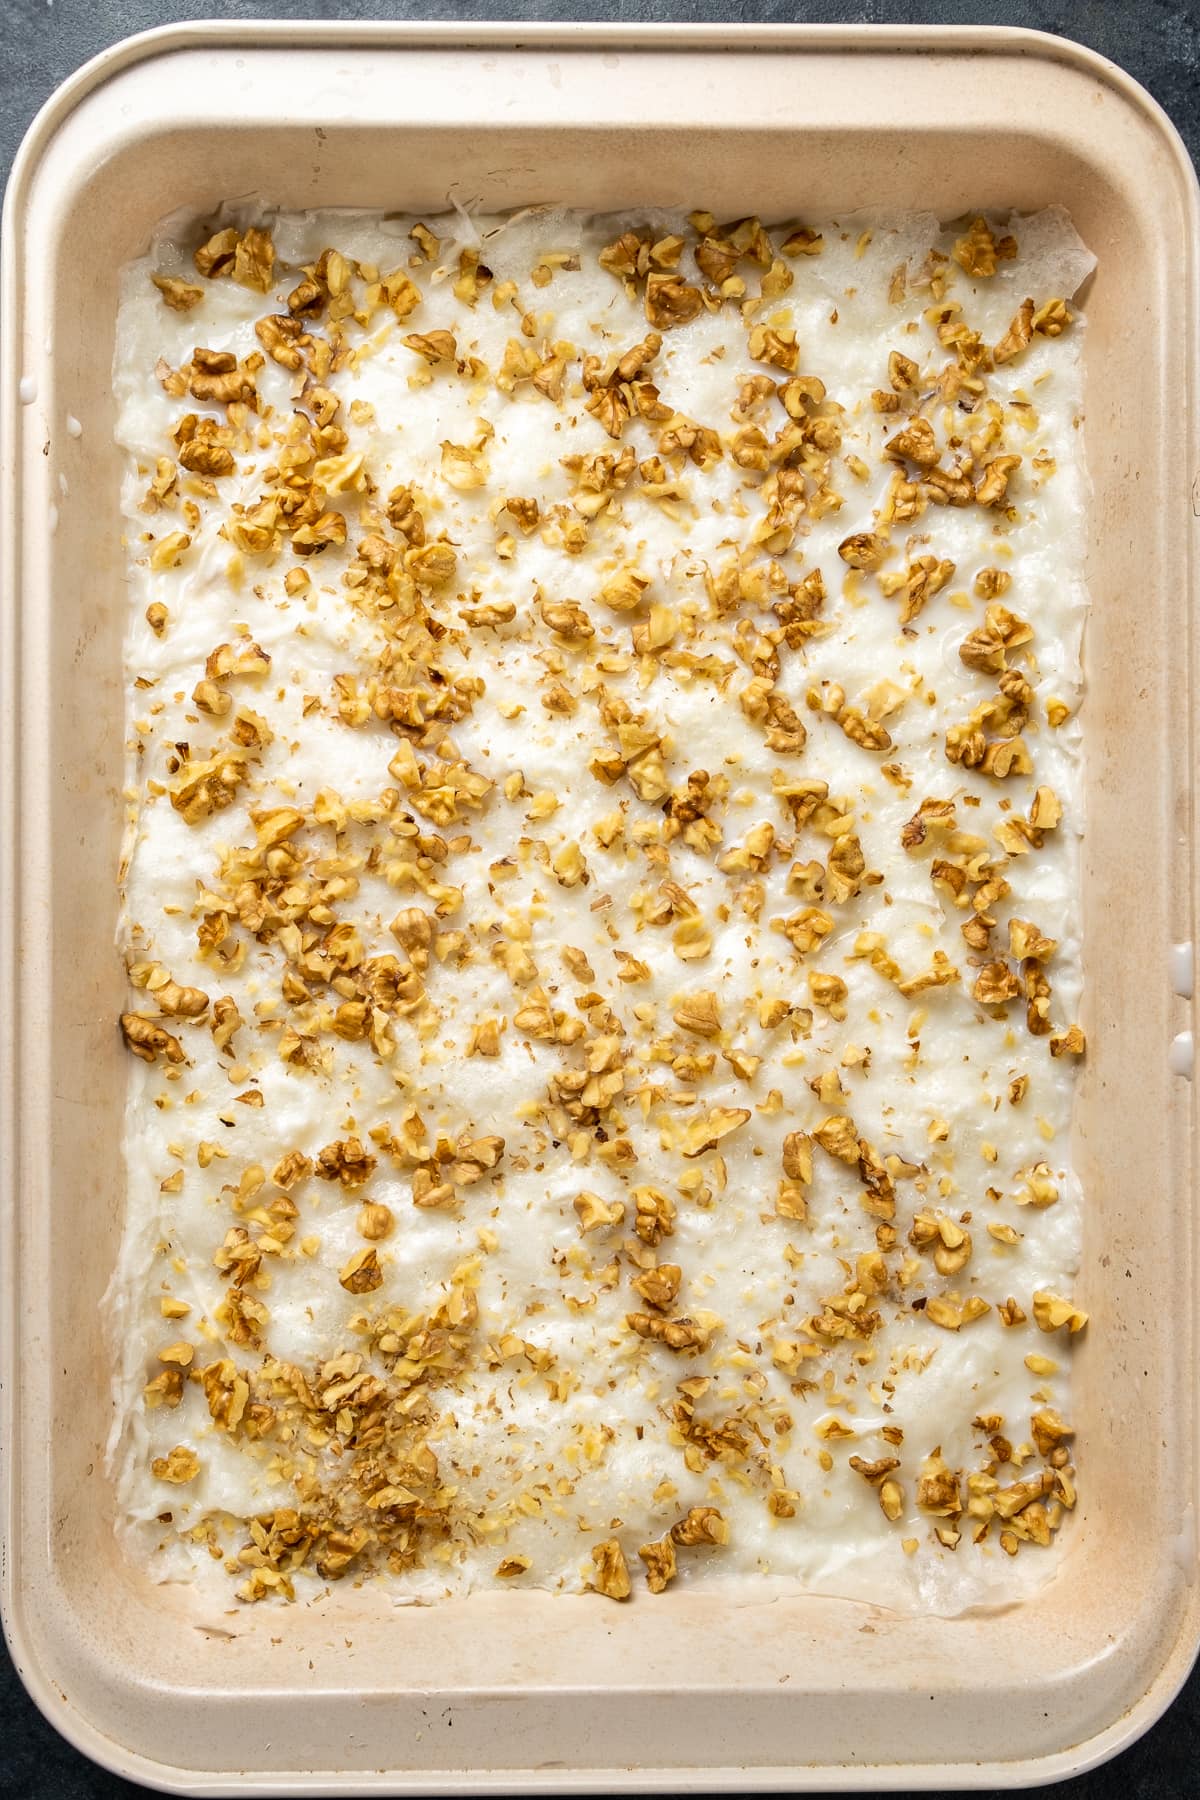 Gullac sheets wetted with milk and topped with walnuts